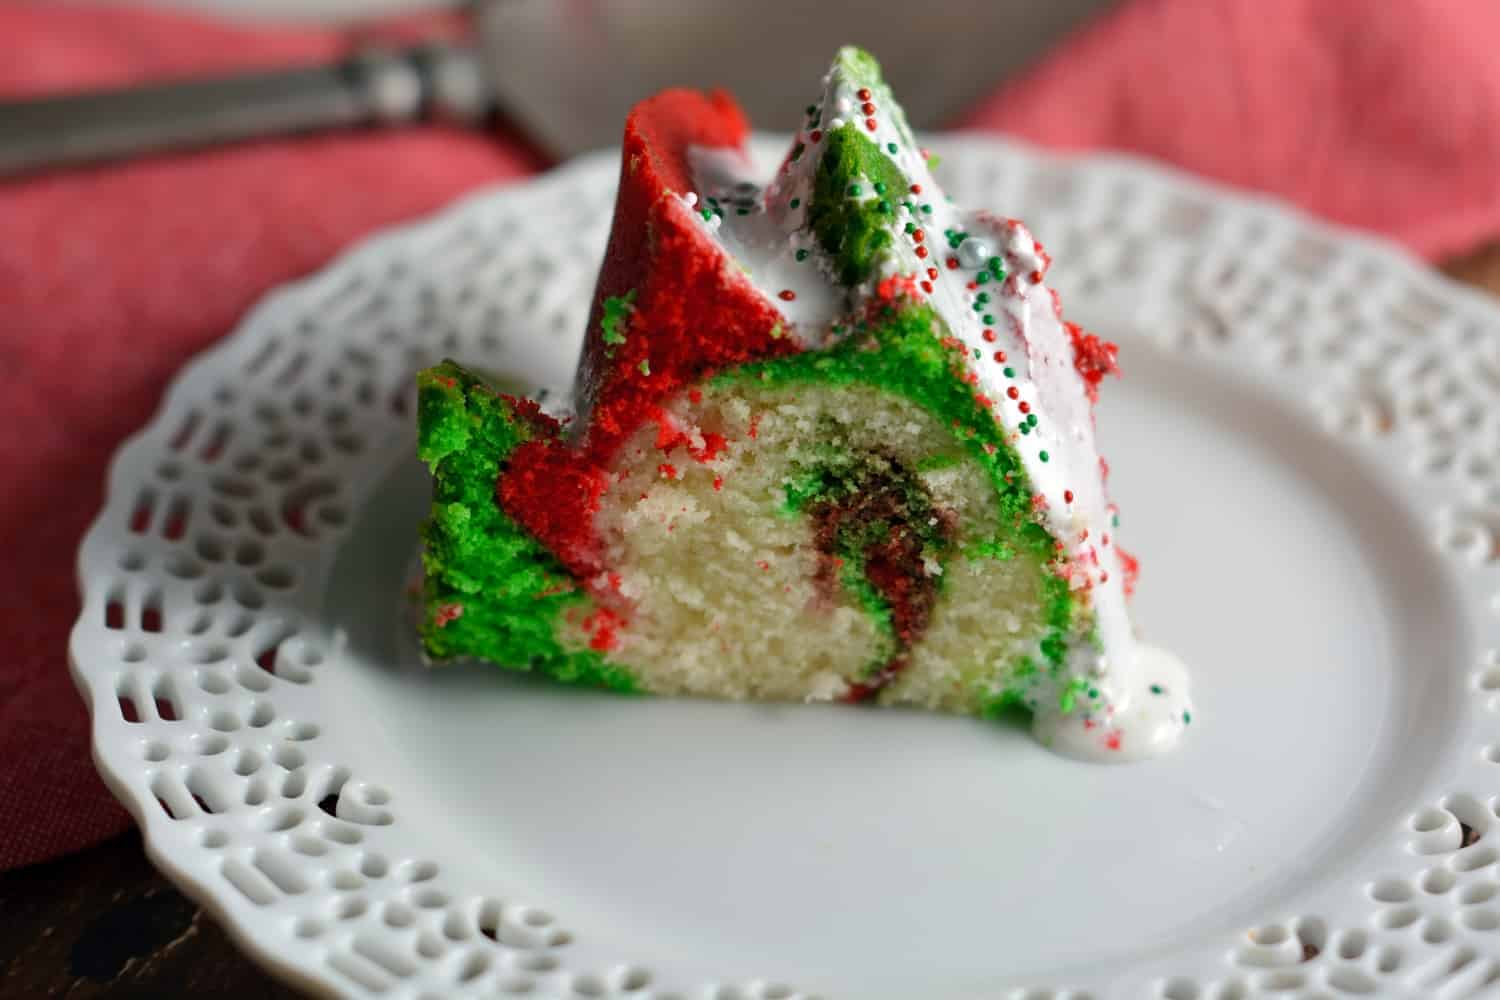 Christmas Swirl Bundt Cake Recipe- You won't believe how easy it is to create this beautiful and festive vanilla flavored Christmas Swirl Bundt Cake!